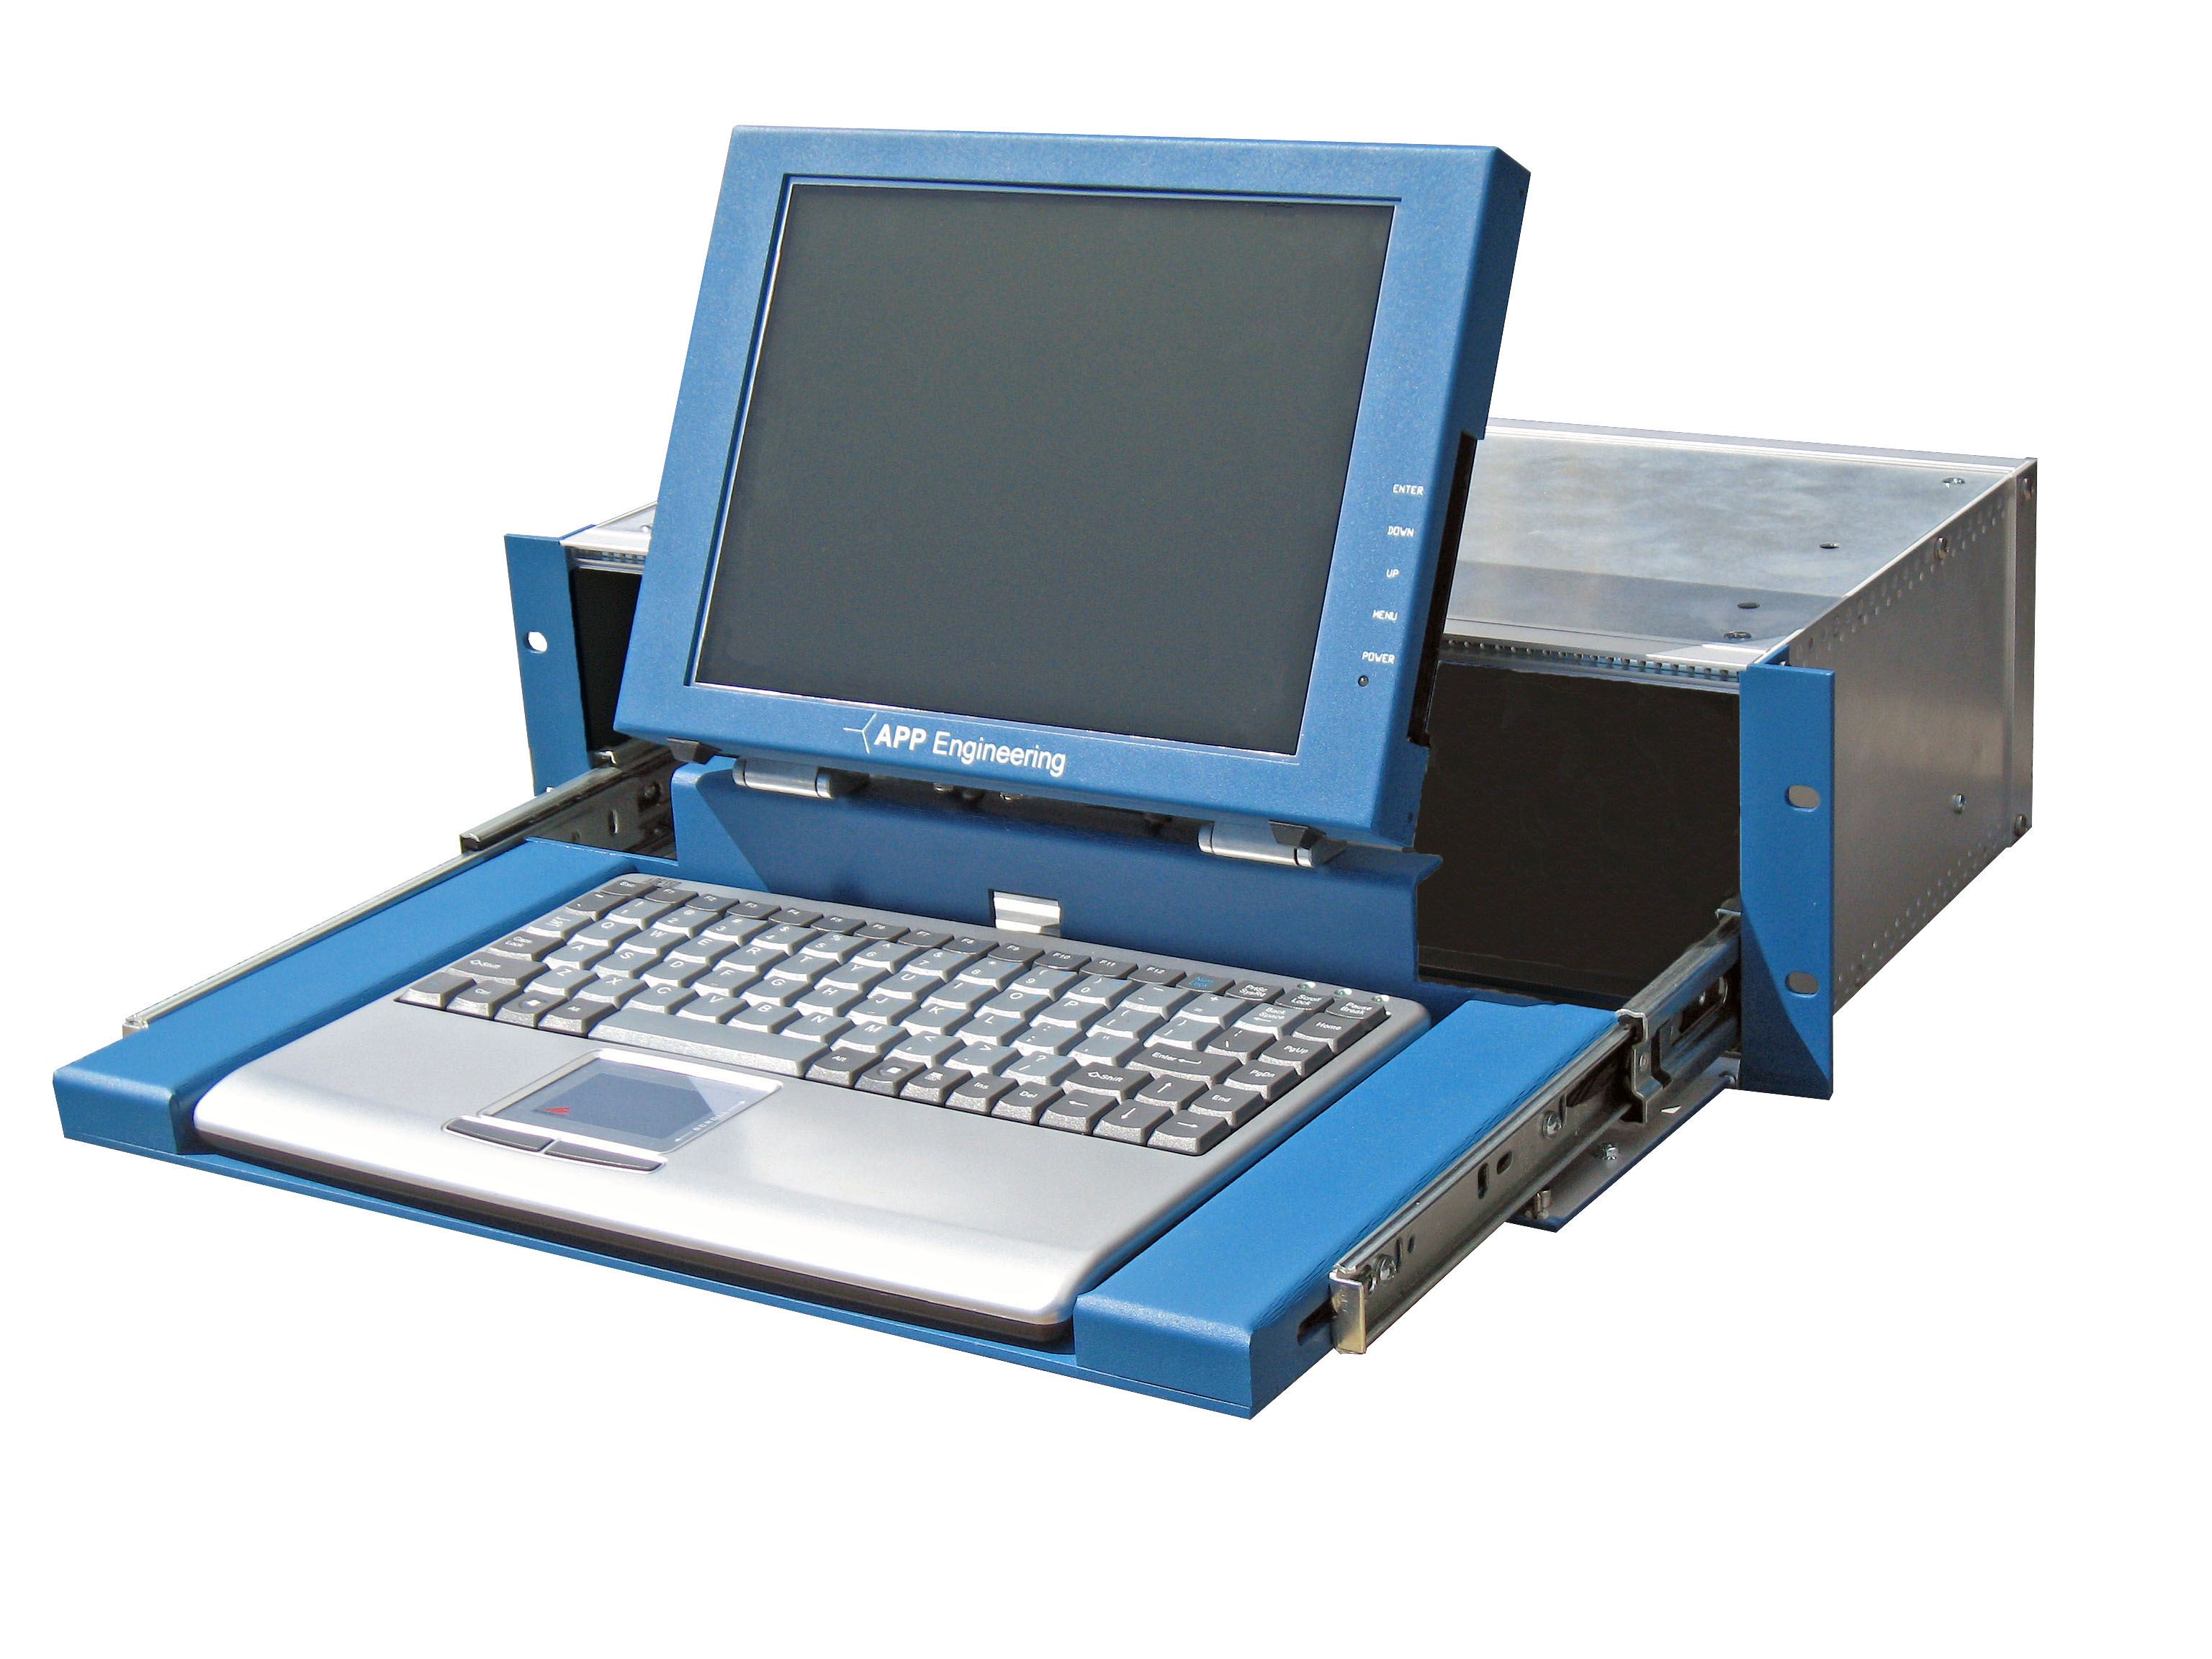 Rugged Monitor and Keyboard associated with Digital Fault Recorder